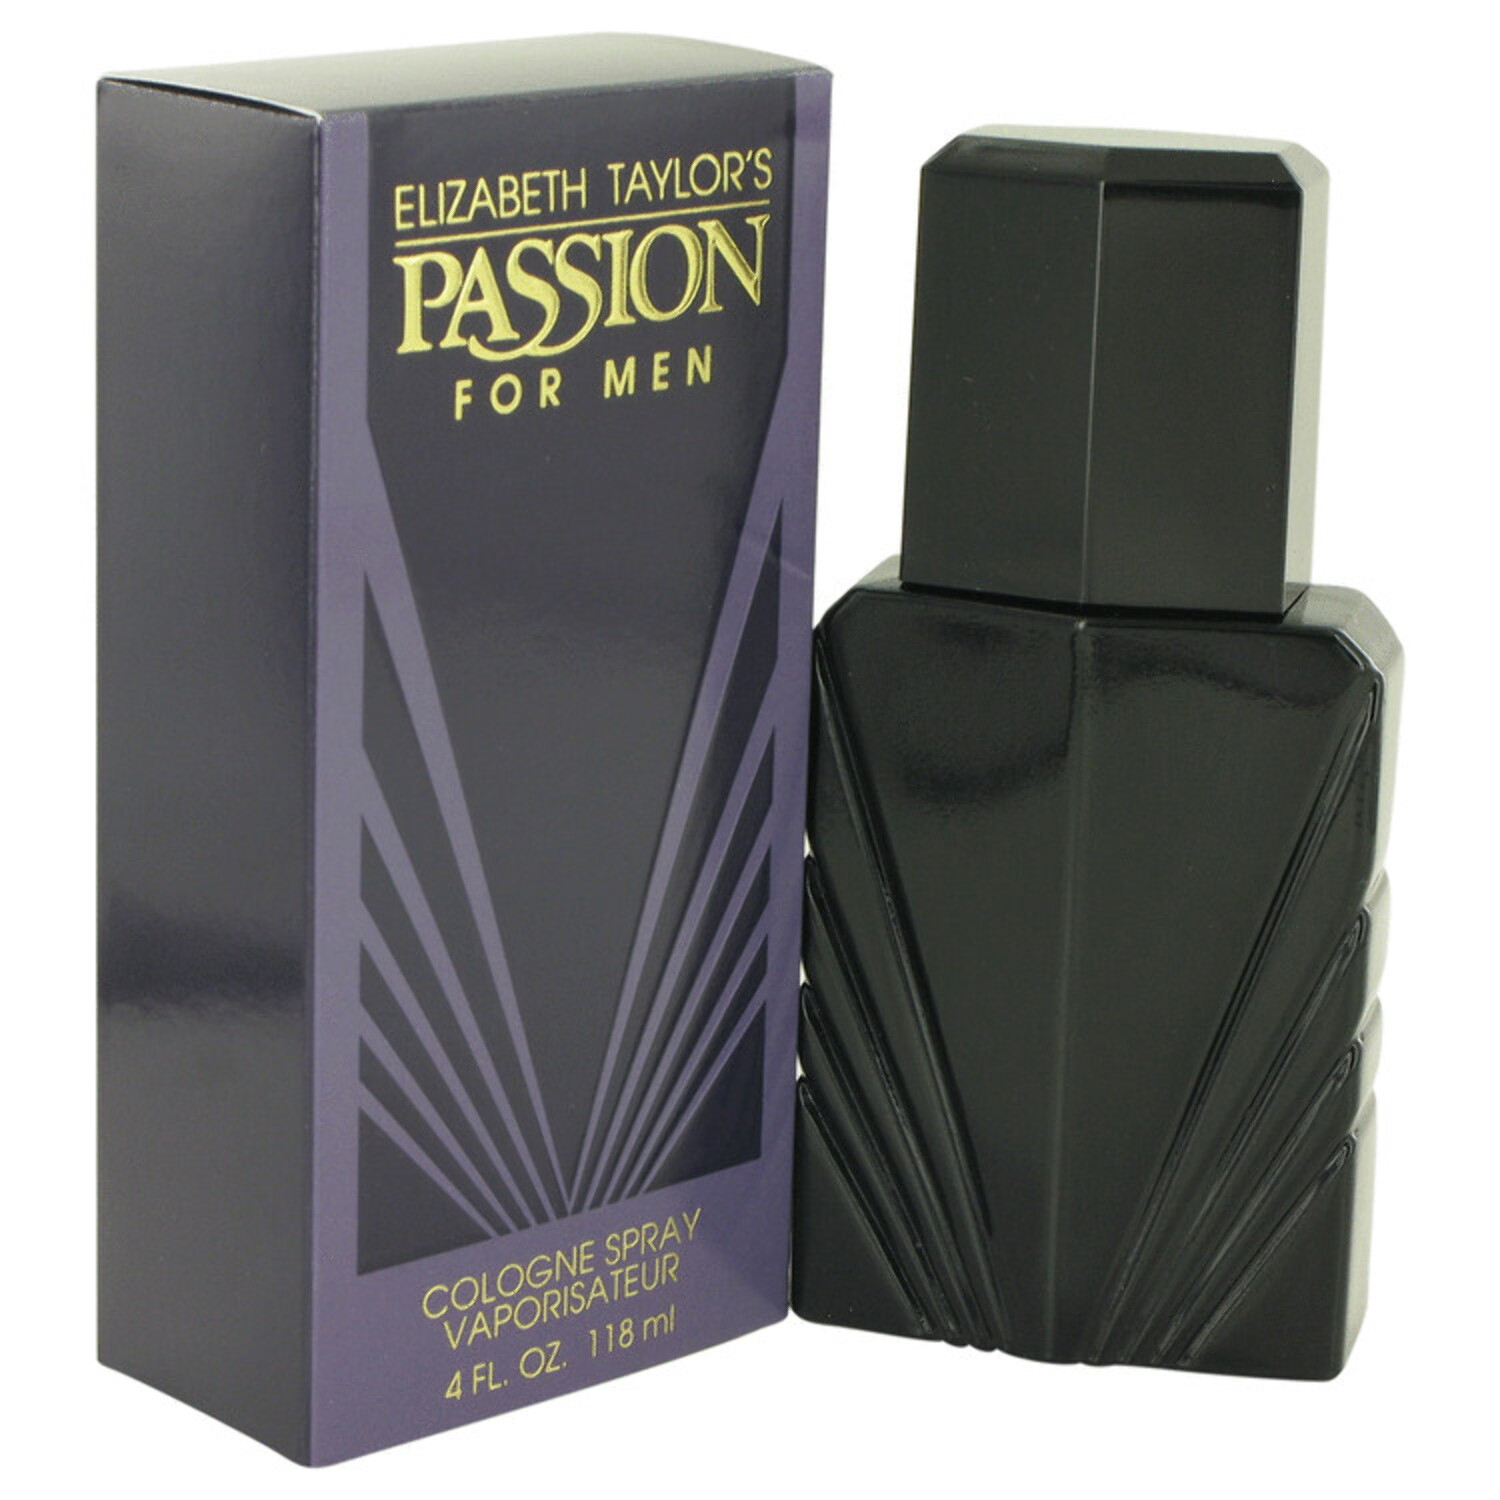 Passion Cologne By Elizabeth Taylor 120 Ml Cologne Spray For Men